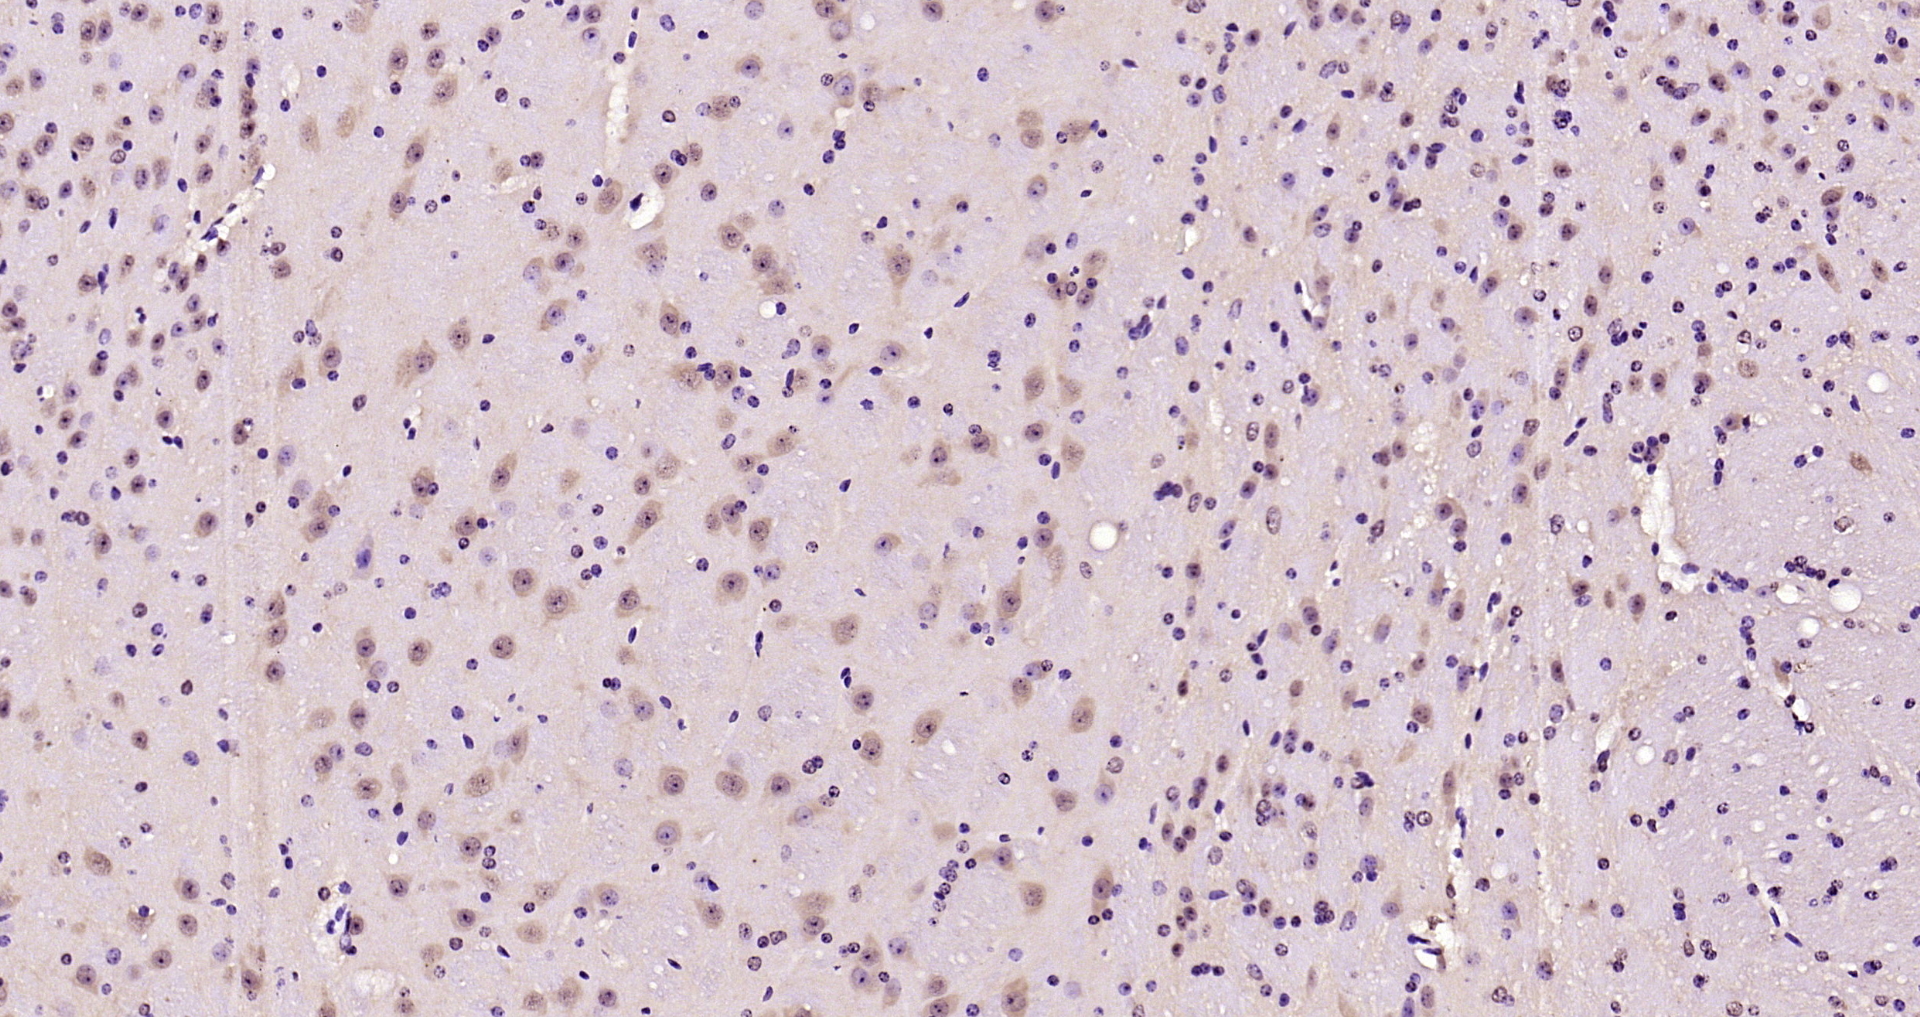 Paraformaldehyde-fixed, paraffin embedded Mouse brain; Antigen retrieval by boiling in sodium citrate buffer (pH6.0) for 15min; Block endogenous peroxidase by 3% hydrogen peroxide for 20 minutes; Blocking buffer (normal goat serum) at 37°C for 30min; Antibody incubation with AMPK alpha-1/2 (Thr183/Thr172) Polyclonal Antibody, Unconjugated (bs-4002R) at 1:200 overnight at 4°C, DAB staining.